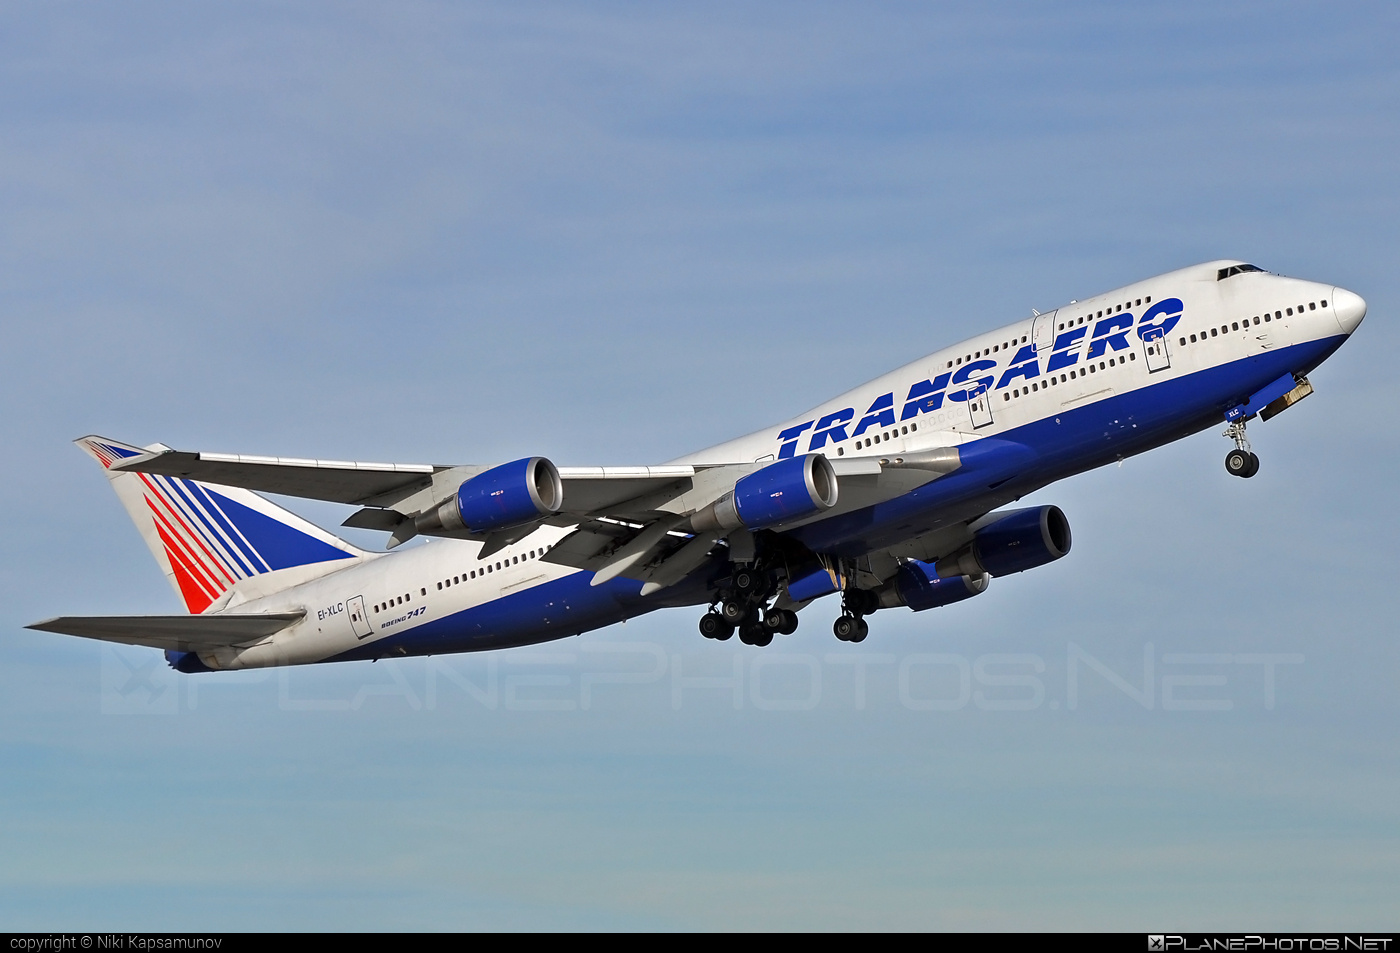 Boeing 747-400 - EI-XLC operated by Transaero Airlines #b747 #boeing #boeing747 #jumbo #transaero #transaeroairlines